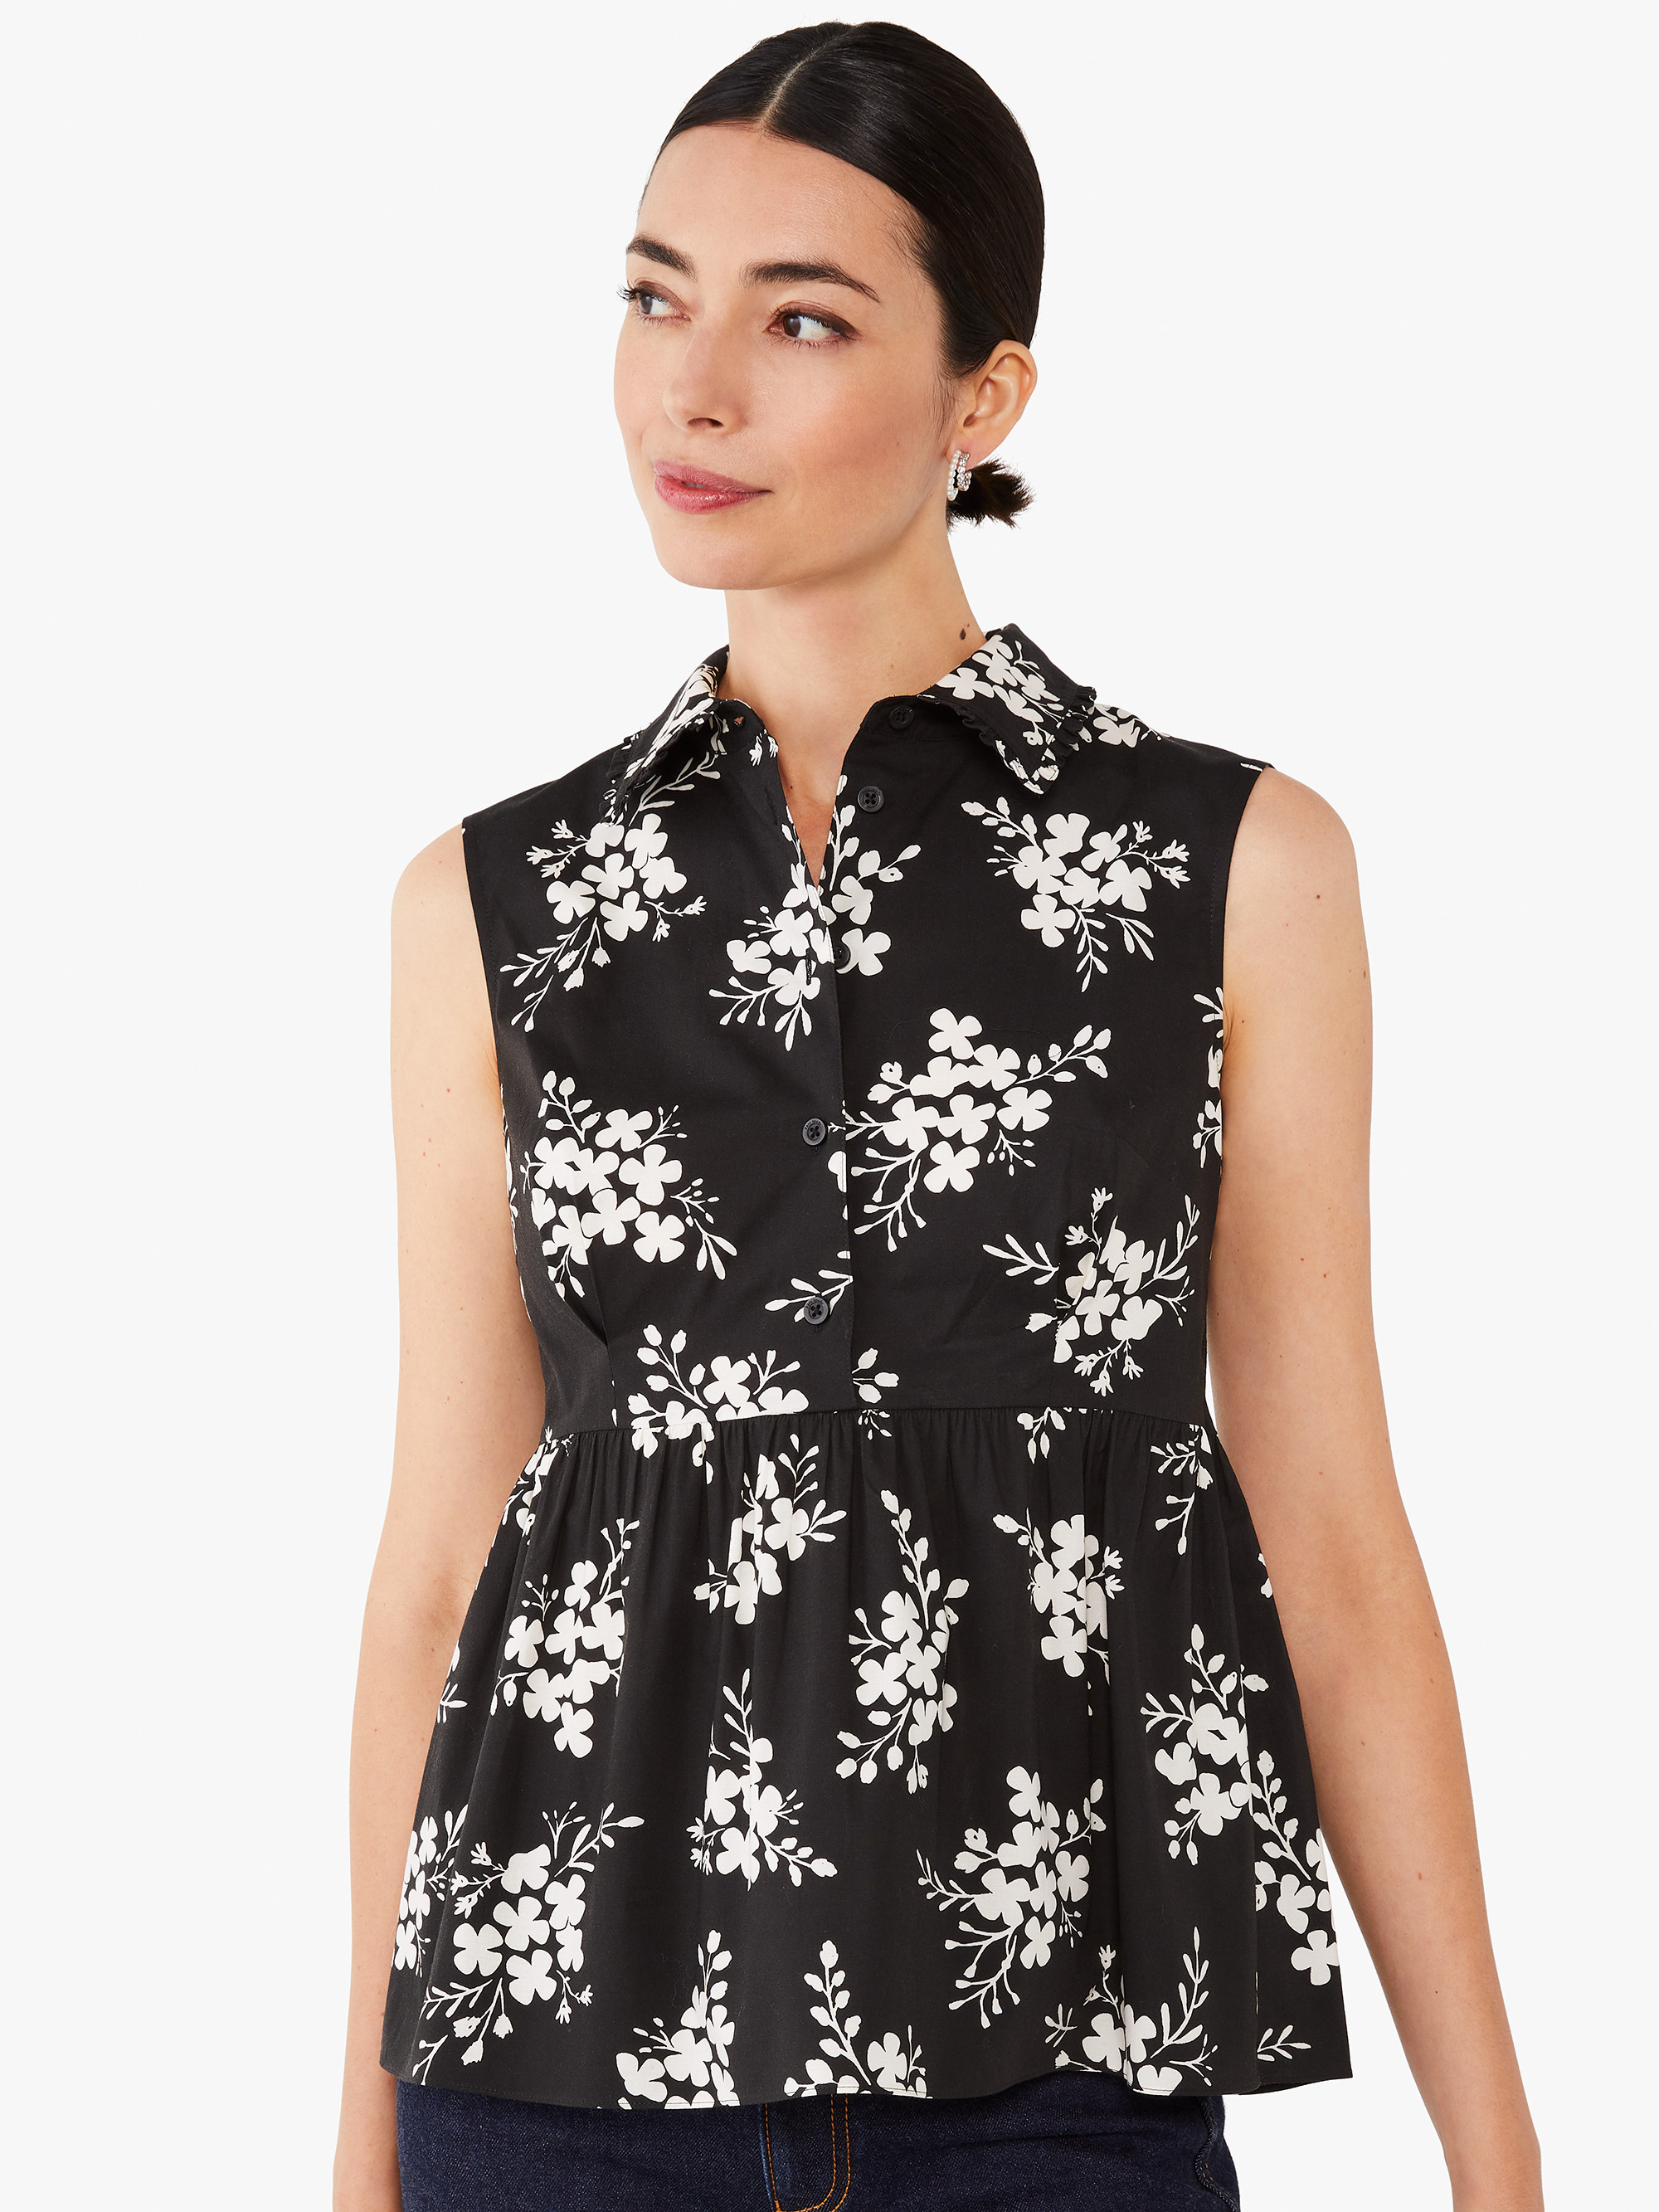 floral clusters flounce top